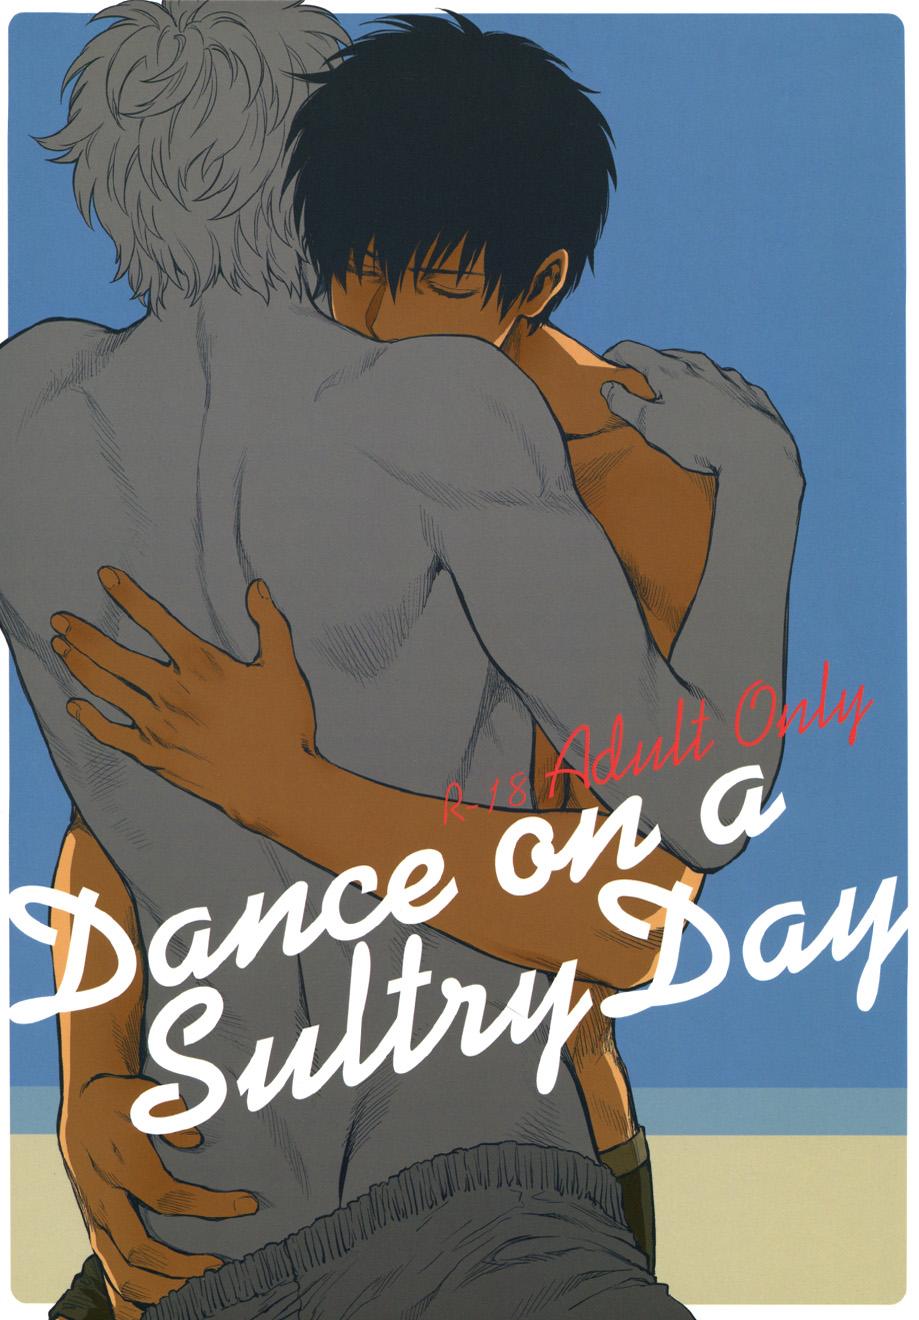 Softcore Dance on a SultryDay - Gintama Uncut - Page 1